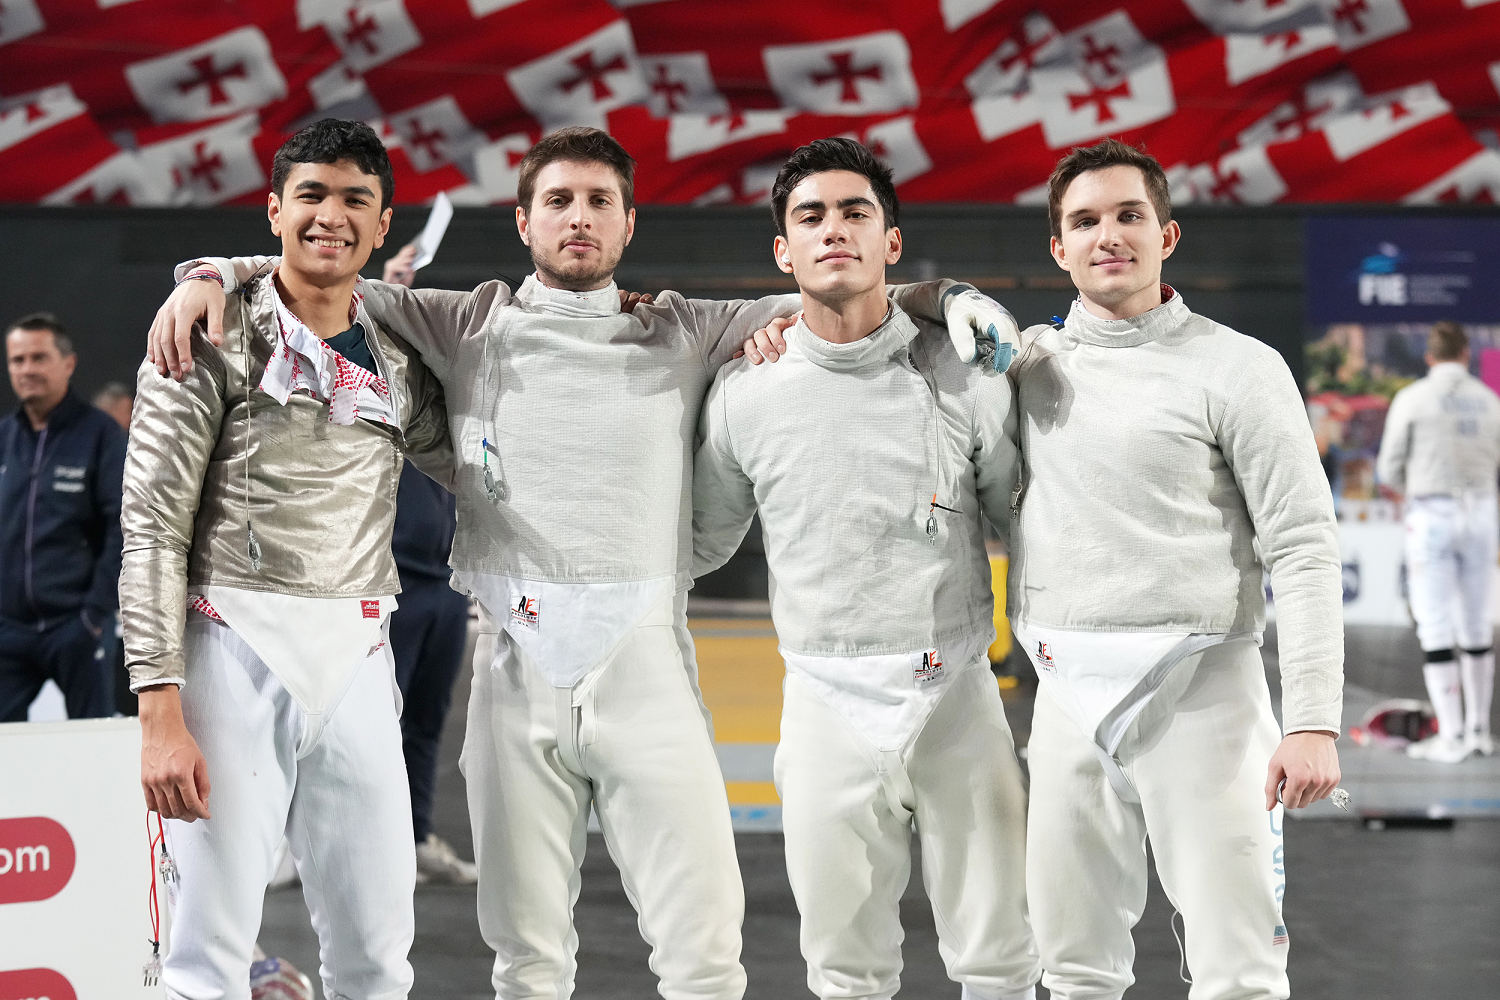 Harvard’s fencing program aims to show off its meteoric rise in Paris